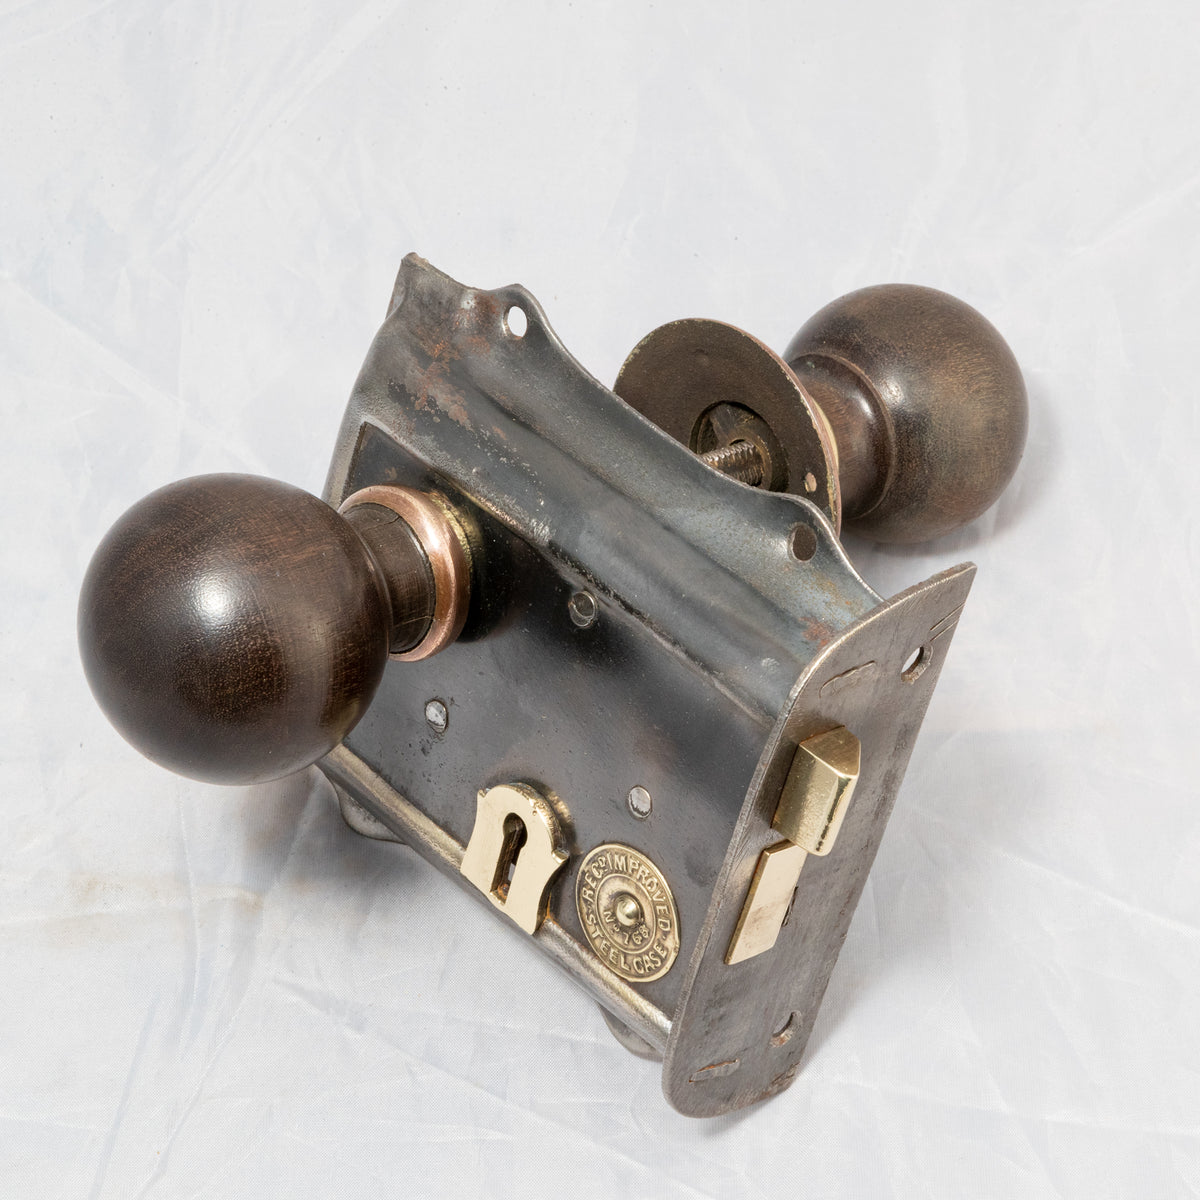 Reclaimed Rim Lock Complete with Wooden Handles | The Architectural Forum